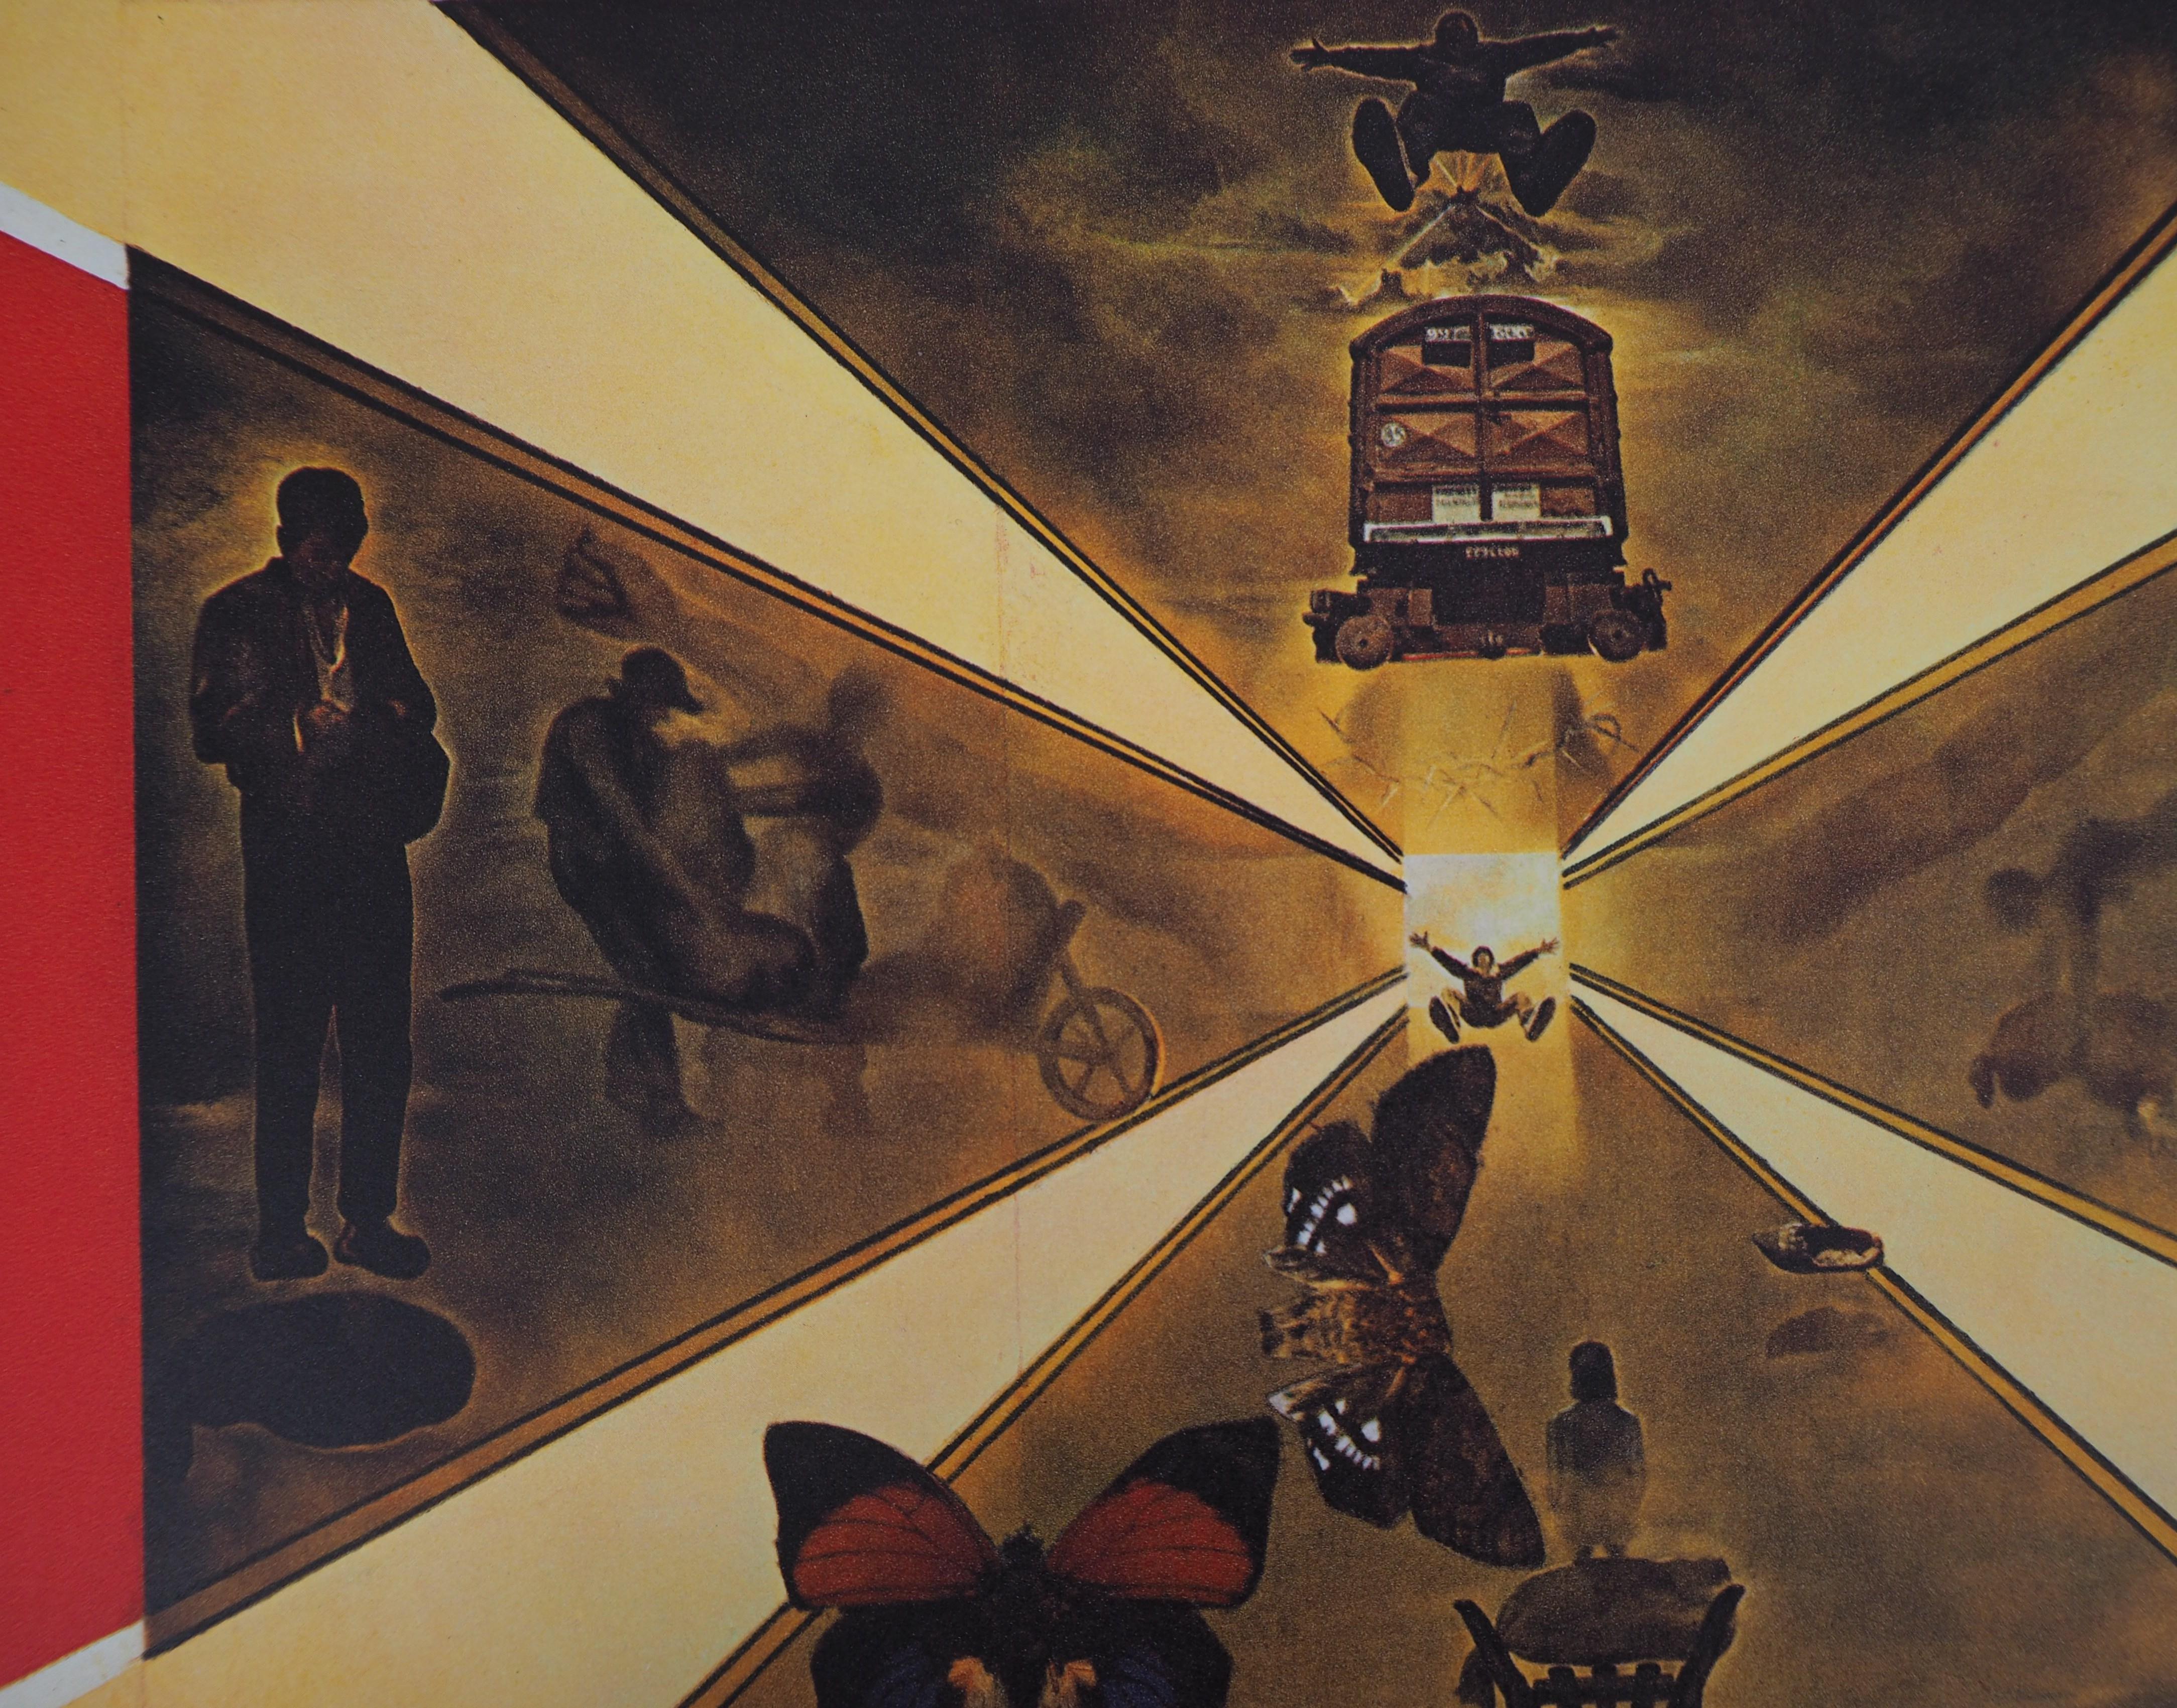 after Salvador DALI (1904-1969)
Butterfly suite : Roussillon, 1969

Heliogravure / Photogravure after an original design by Dali
Blind stamp signature bottom right
Numbered / 1700 copies
Printed in Draeger workshop
On vellum 53,5 x 37 cm (c. 21 x 15